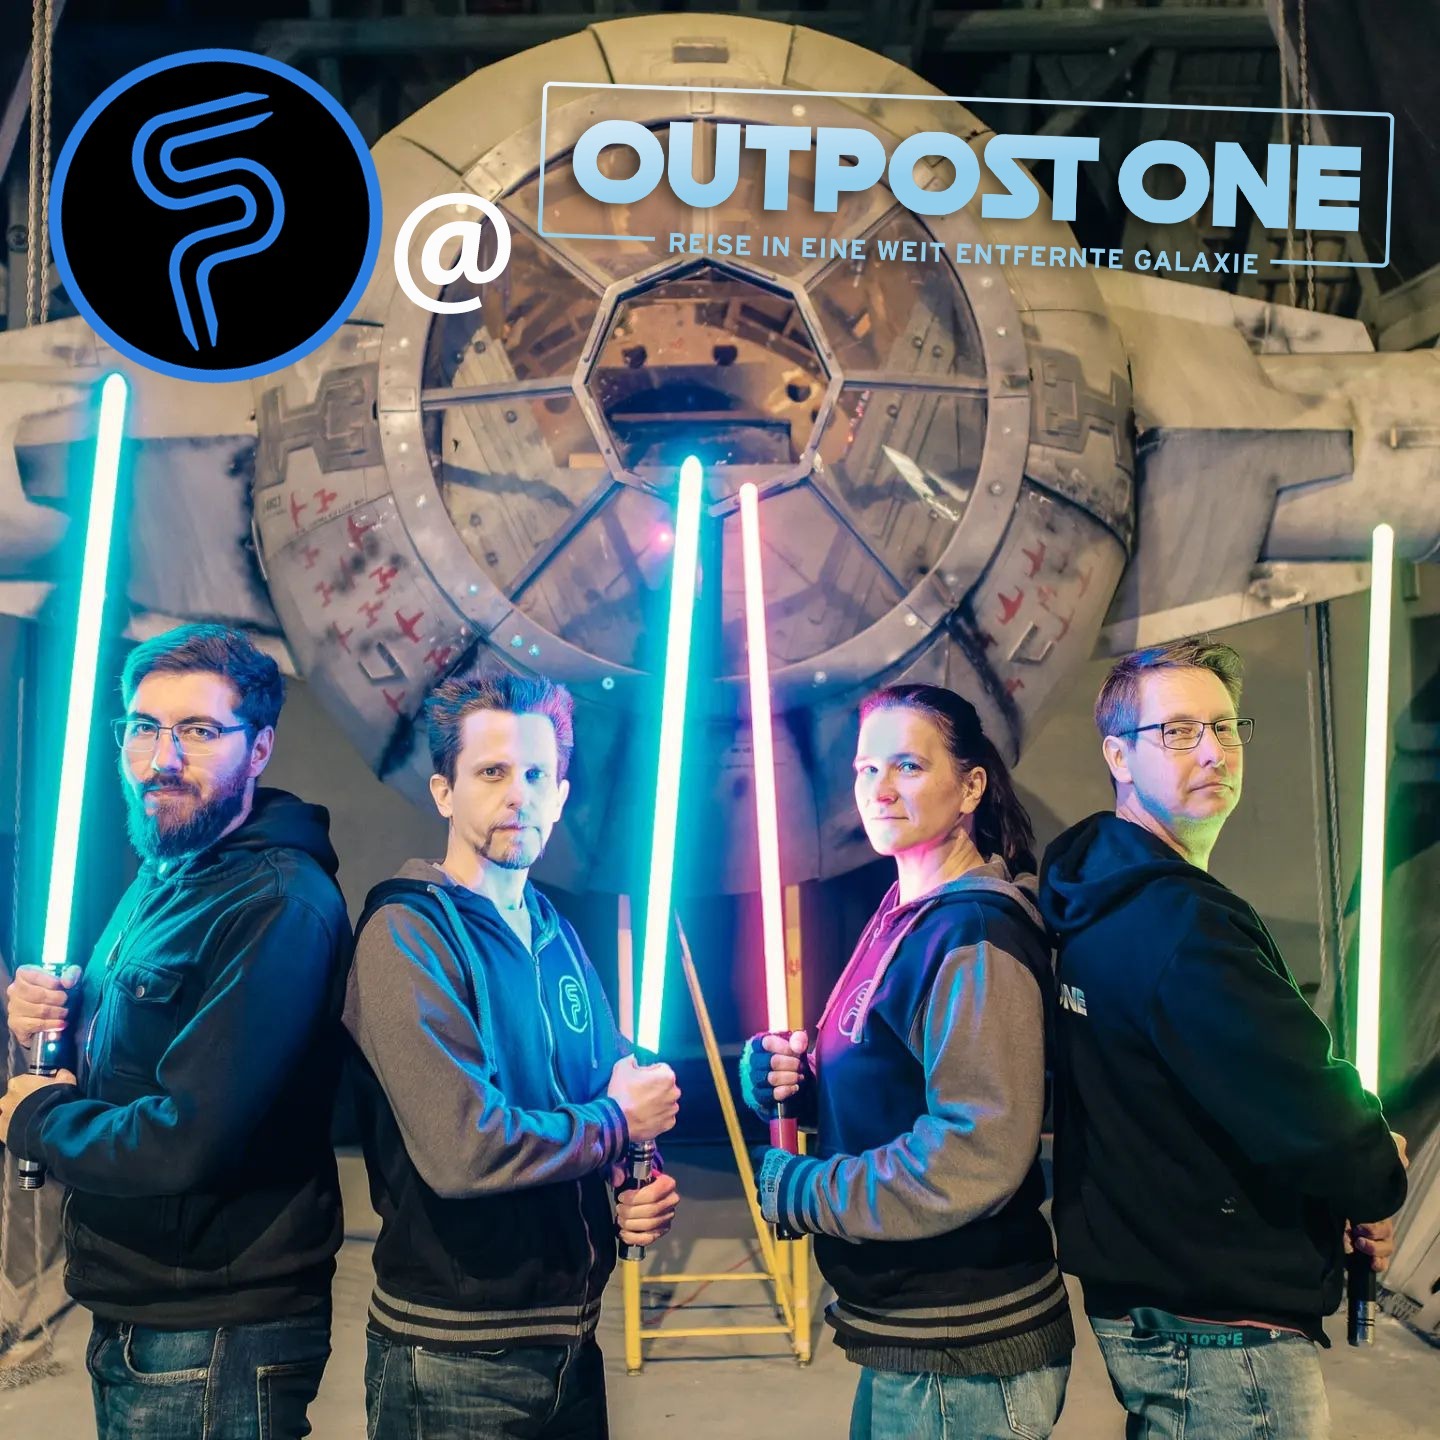 Outpost One